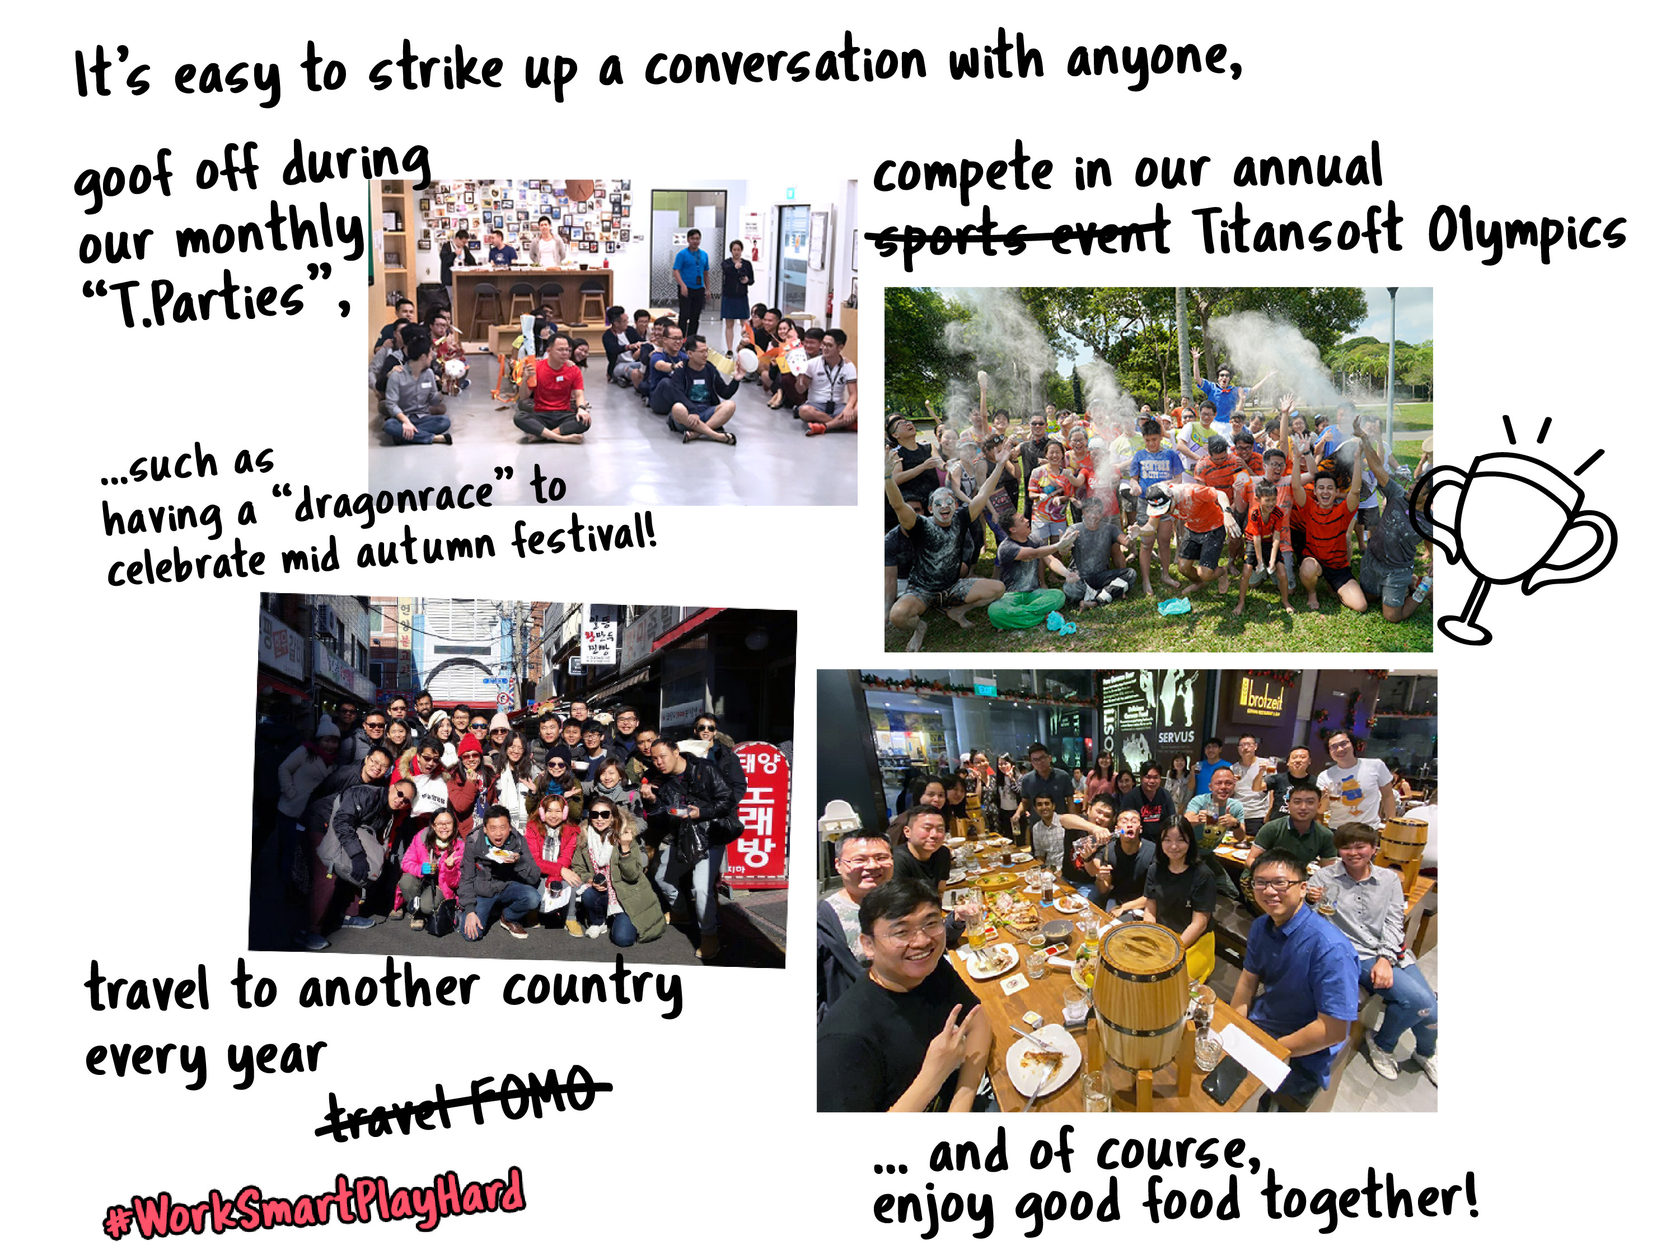 What’s the “Titansoft Culture” like? We call ourselves Producers of Fun, so that pretty much says it all. Our award-winning culture is inclusive - it's easy to strike up a conversation with anyone in office, goof off during our monthly T.Parties, travel to another country every year during our annual company-sponsored overseas trip (no more travel FOMO!), compete in our annual sports event the Titansoft 01ympics, and of course, enjoy good food together! Best Companies to Work For in Asia 2018 &amp; 2019 – HR Asia Singapore’s Best Tech Company to Work For 2017 – Singapore Computer Society Singapore Quality Class with People Niche (2019 - 2021)– Enterprise Singapore Company-wide Agility with Beyond Budgeting, Open Space, &amp; Sociocracy